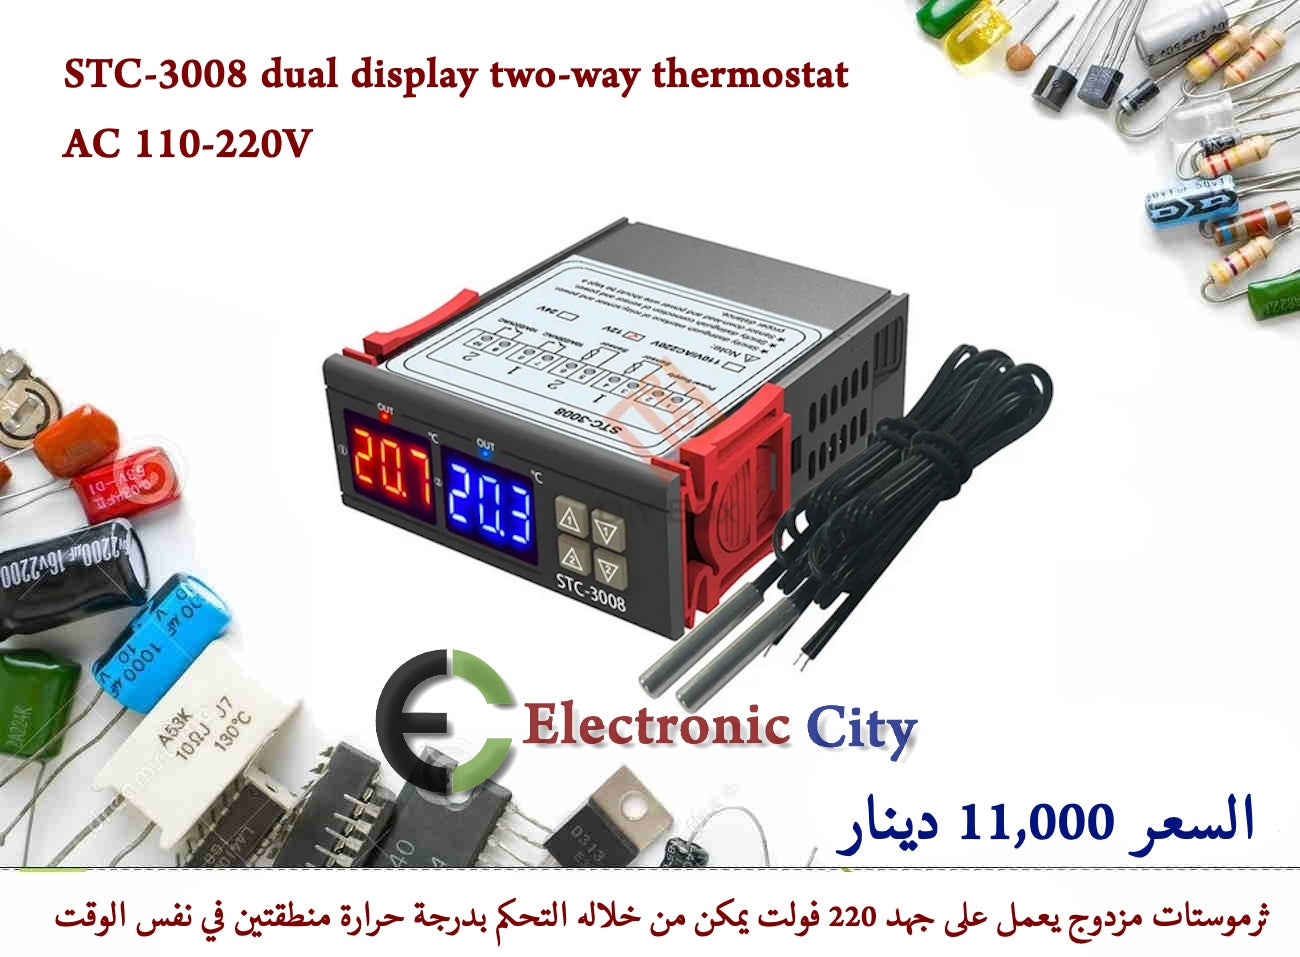 STC-3008 dual display two-way thermostat  X13290